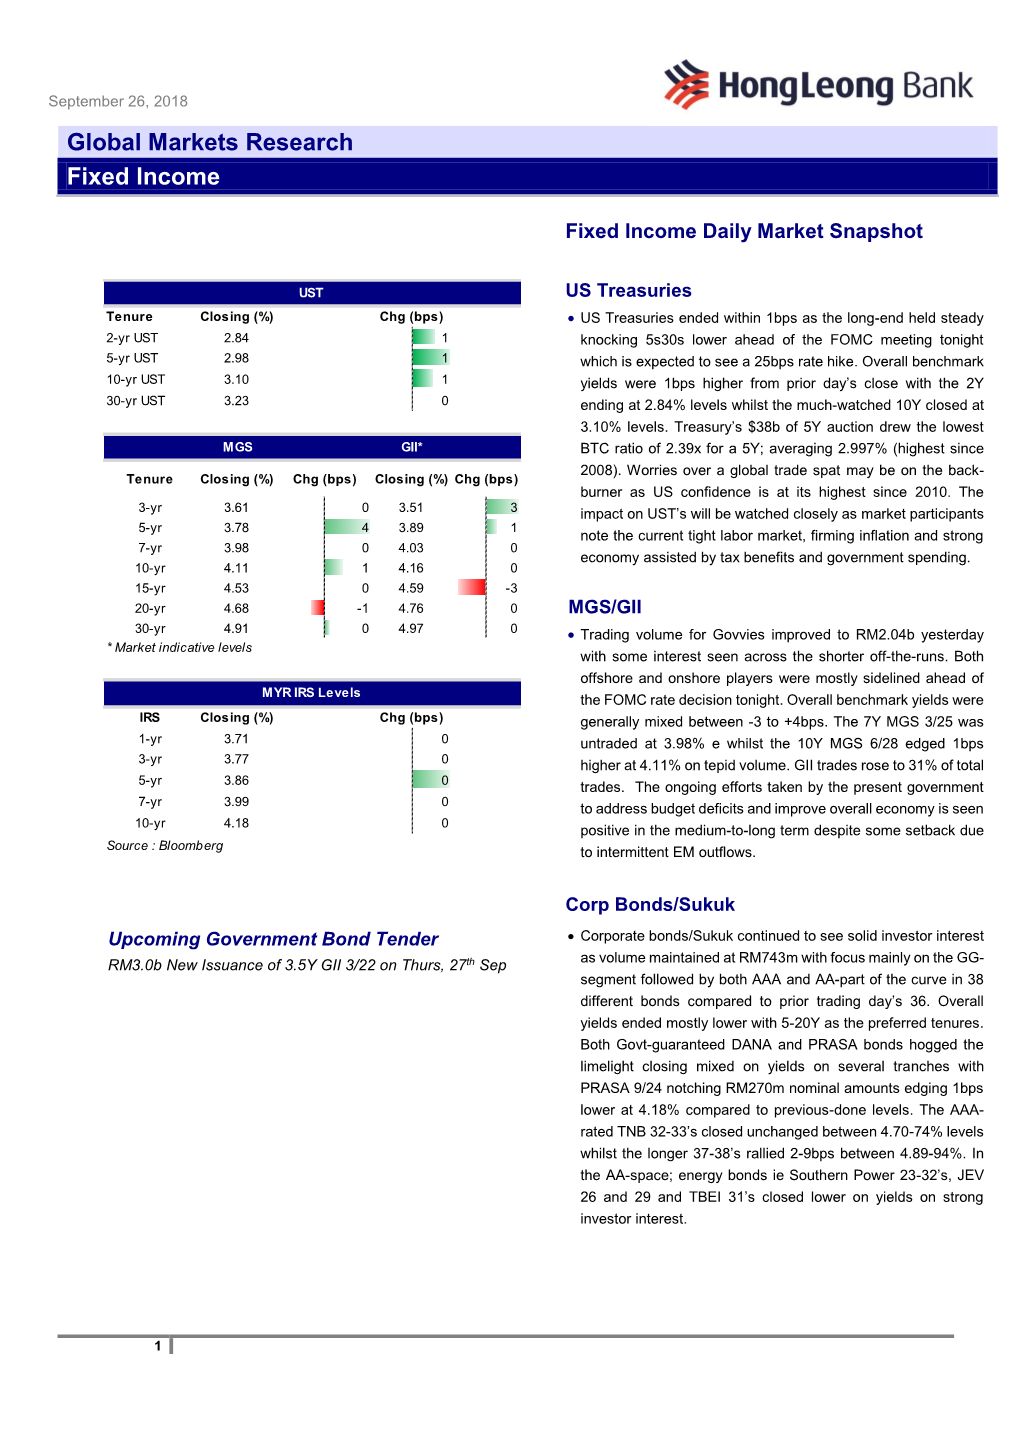 Global Markets Research Fixed Income